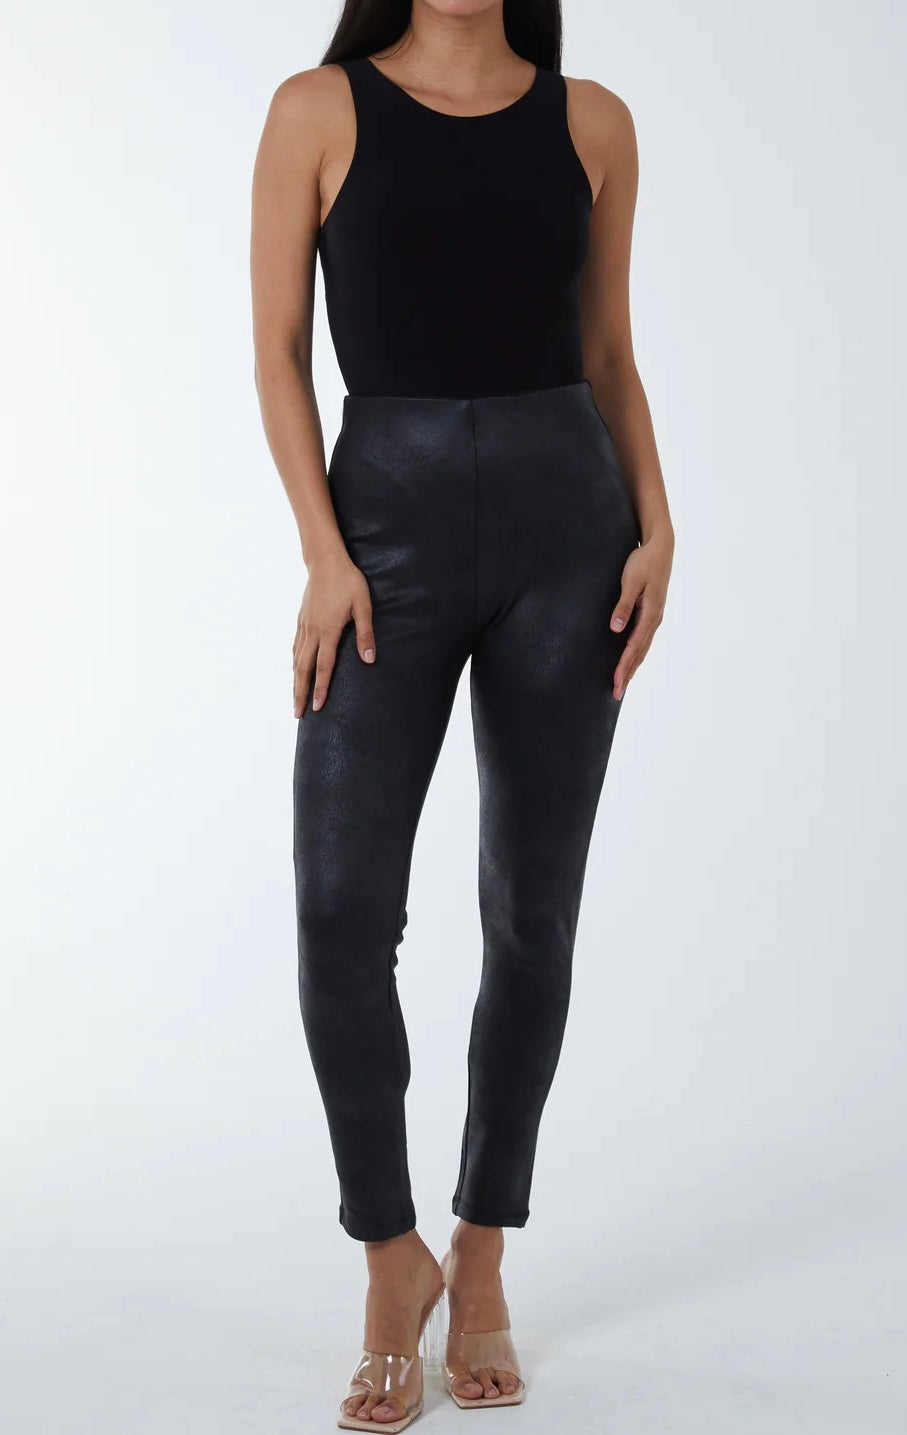 Black Matte Leather Look Leggings Accessories Online: & Fashion Shoes, in Leeds Missy – Based